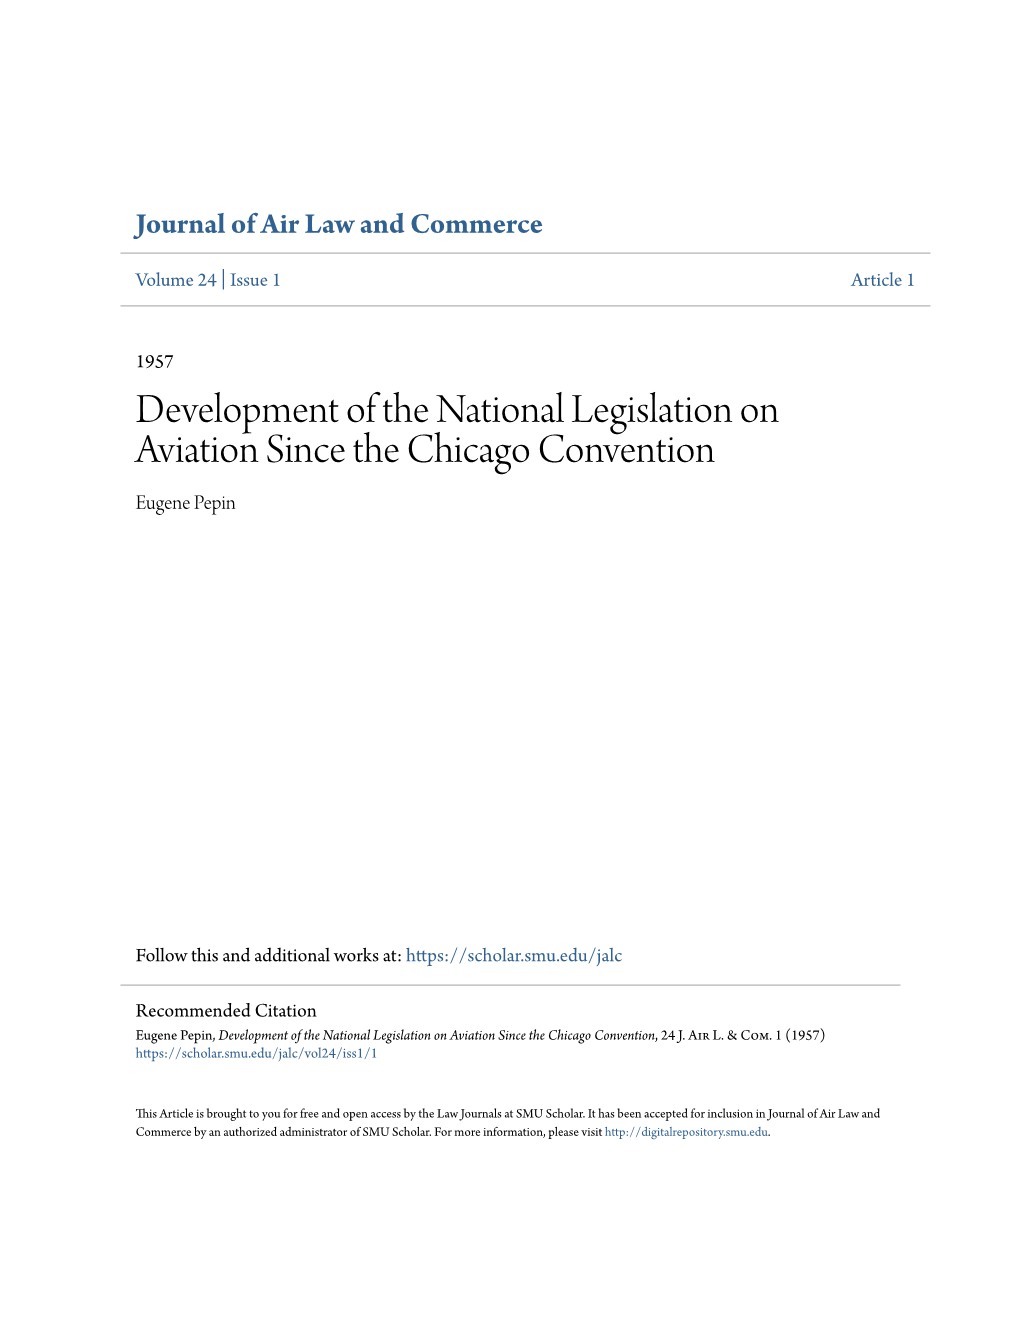 Development of the National Legislation on Aviation Since the Chicago Convention Eugene Pepin